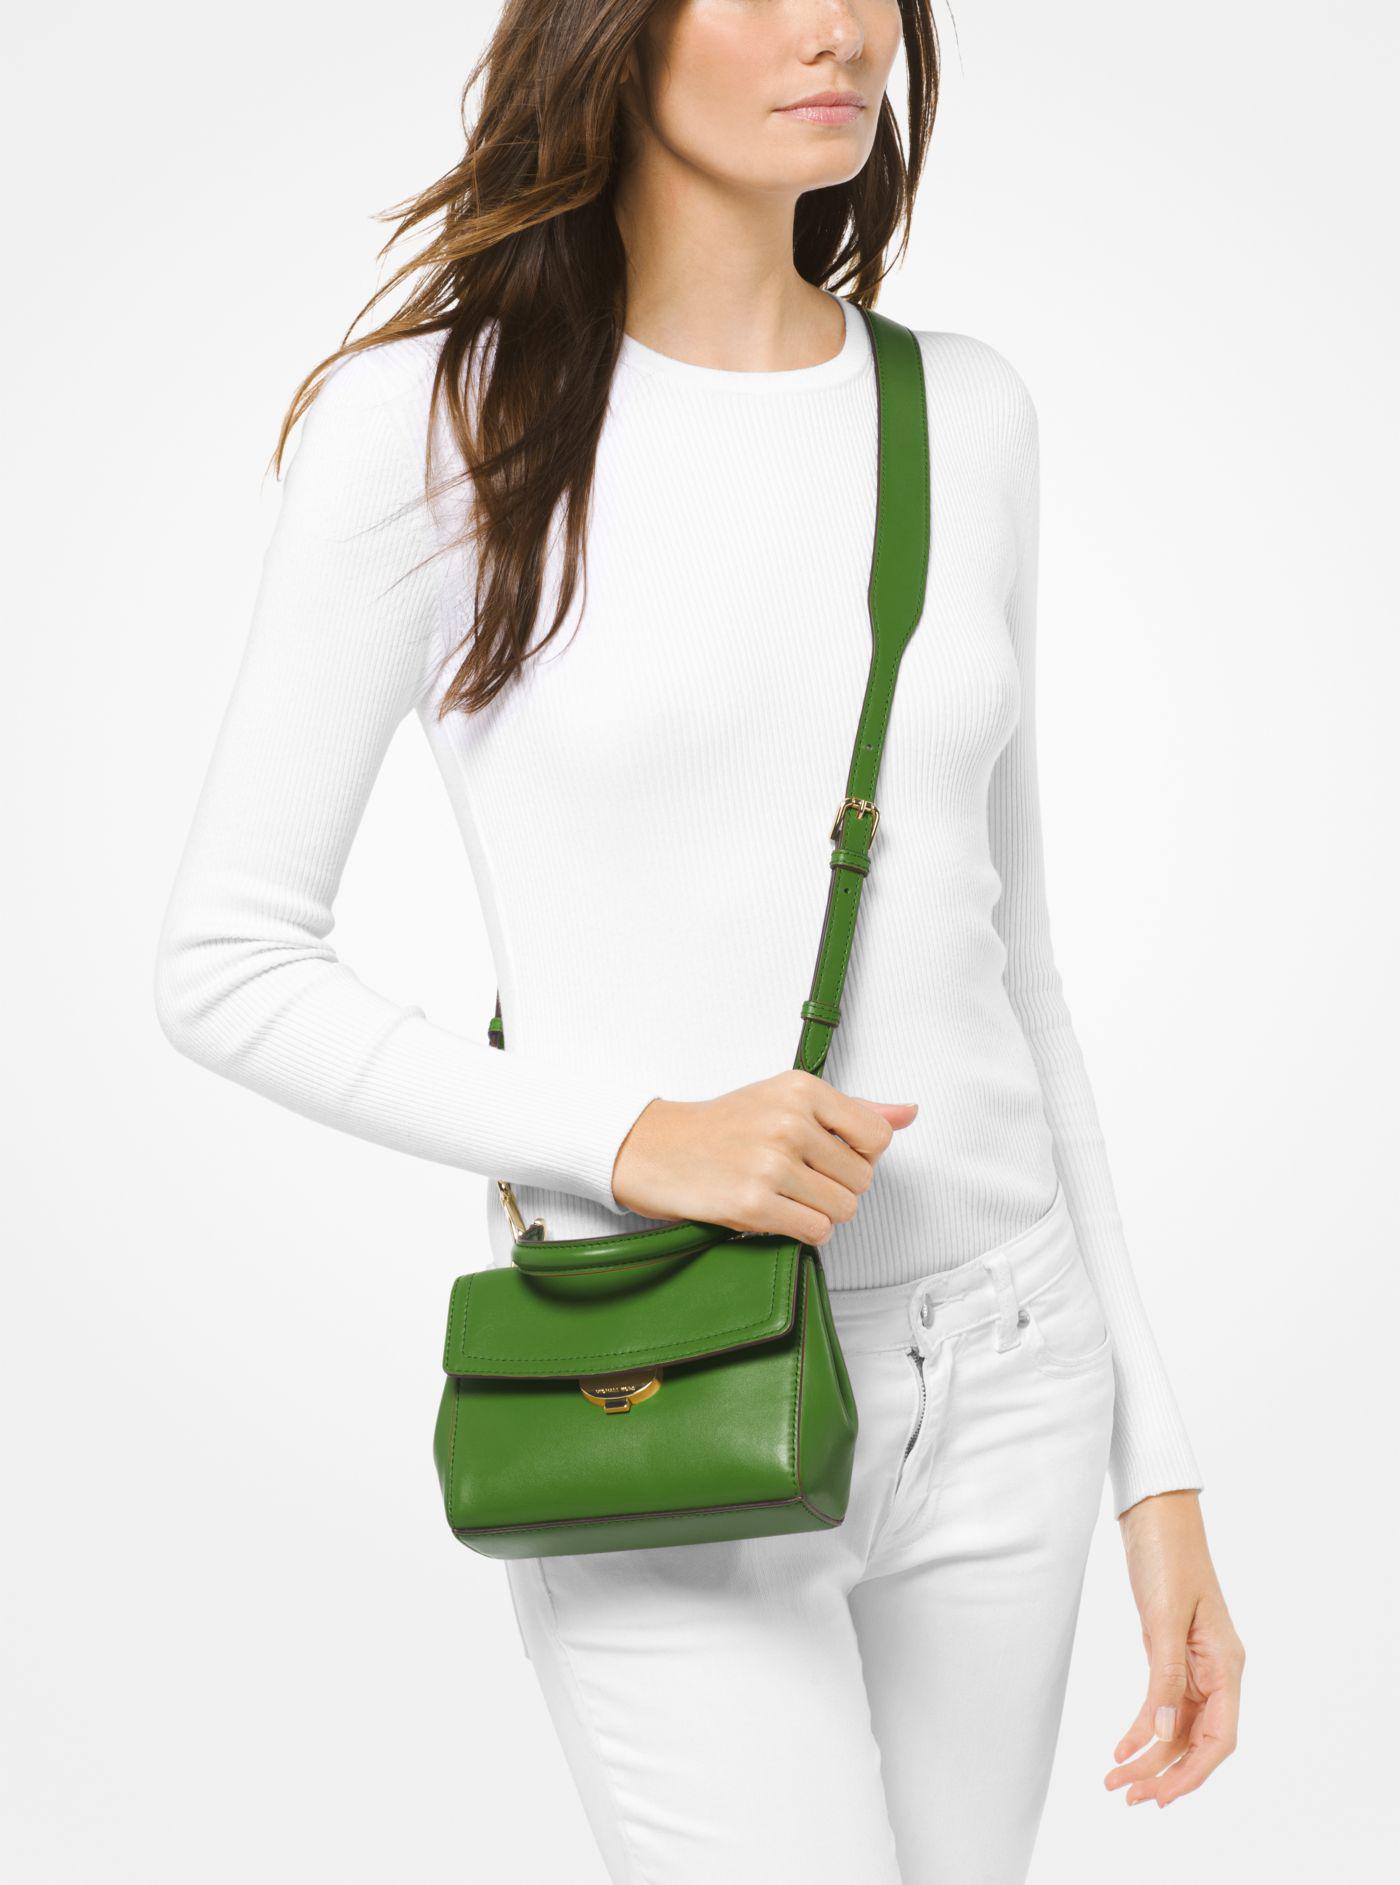 Michael Kors Ava Extra-small Leather Crossbody Bag in Green - Lyst